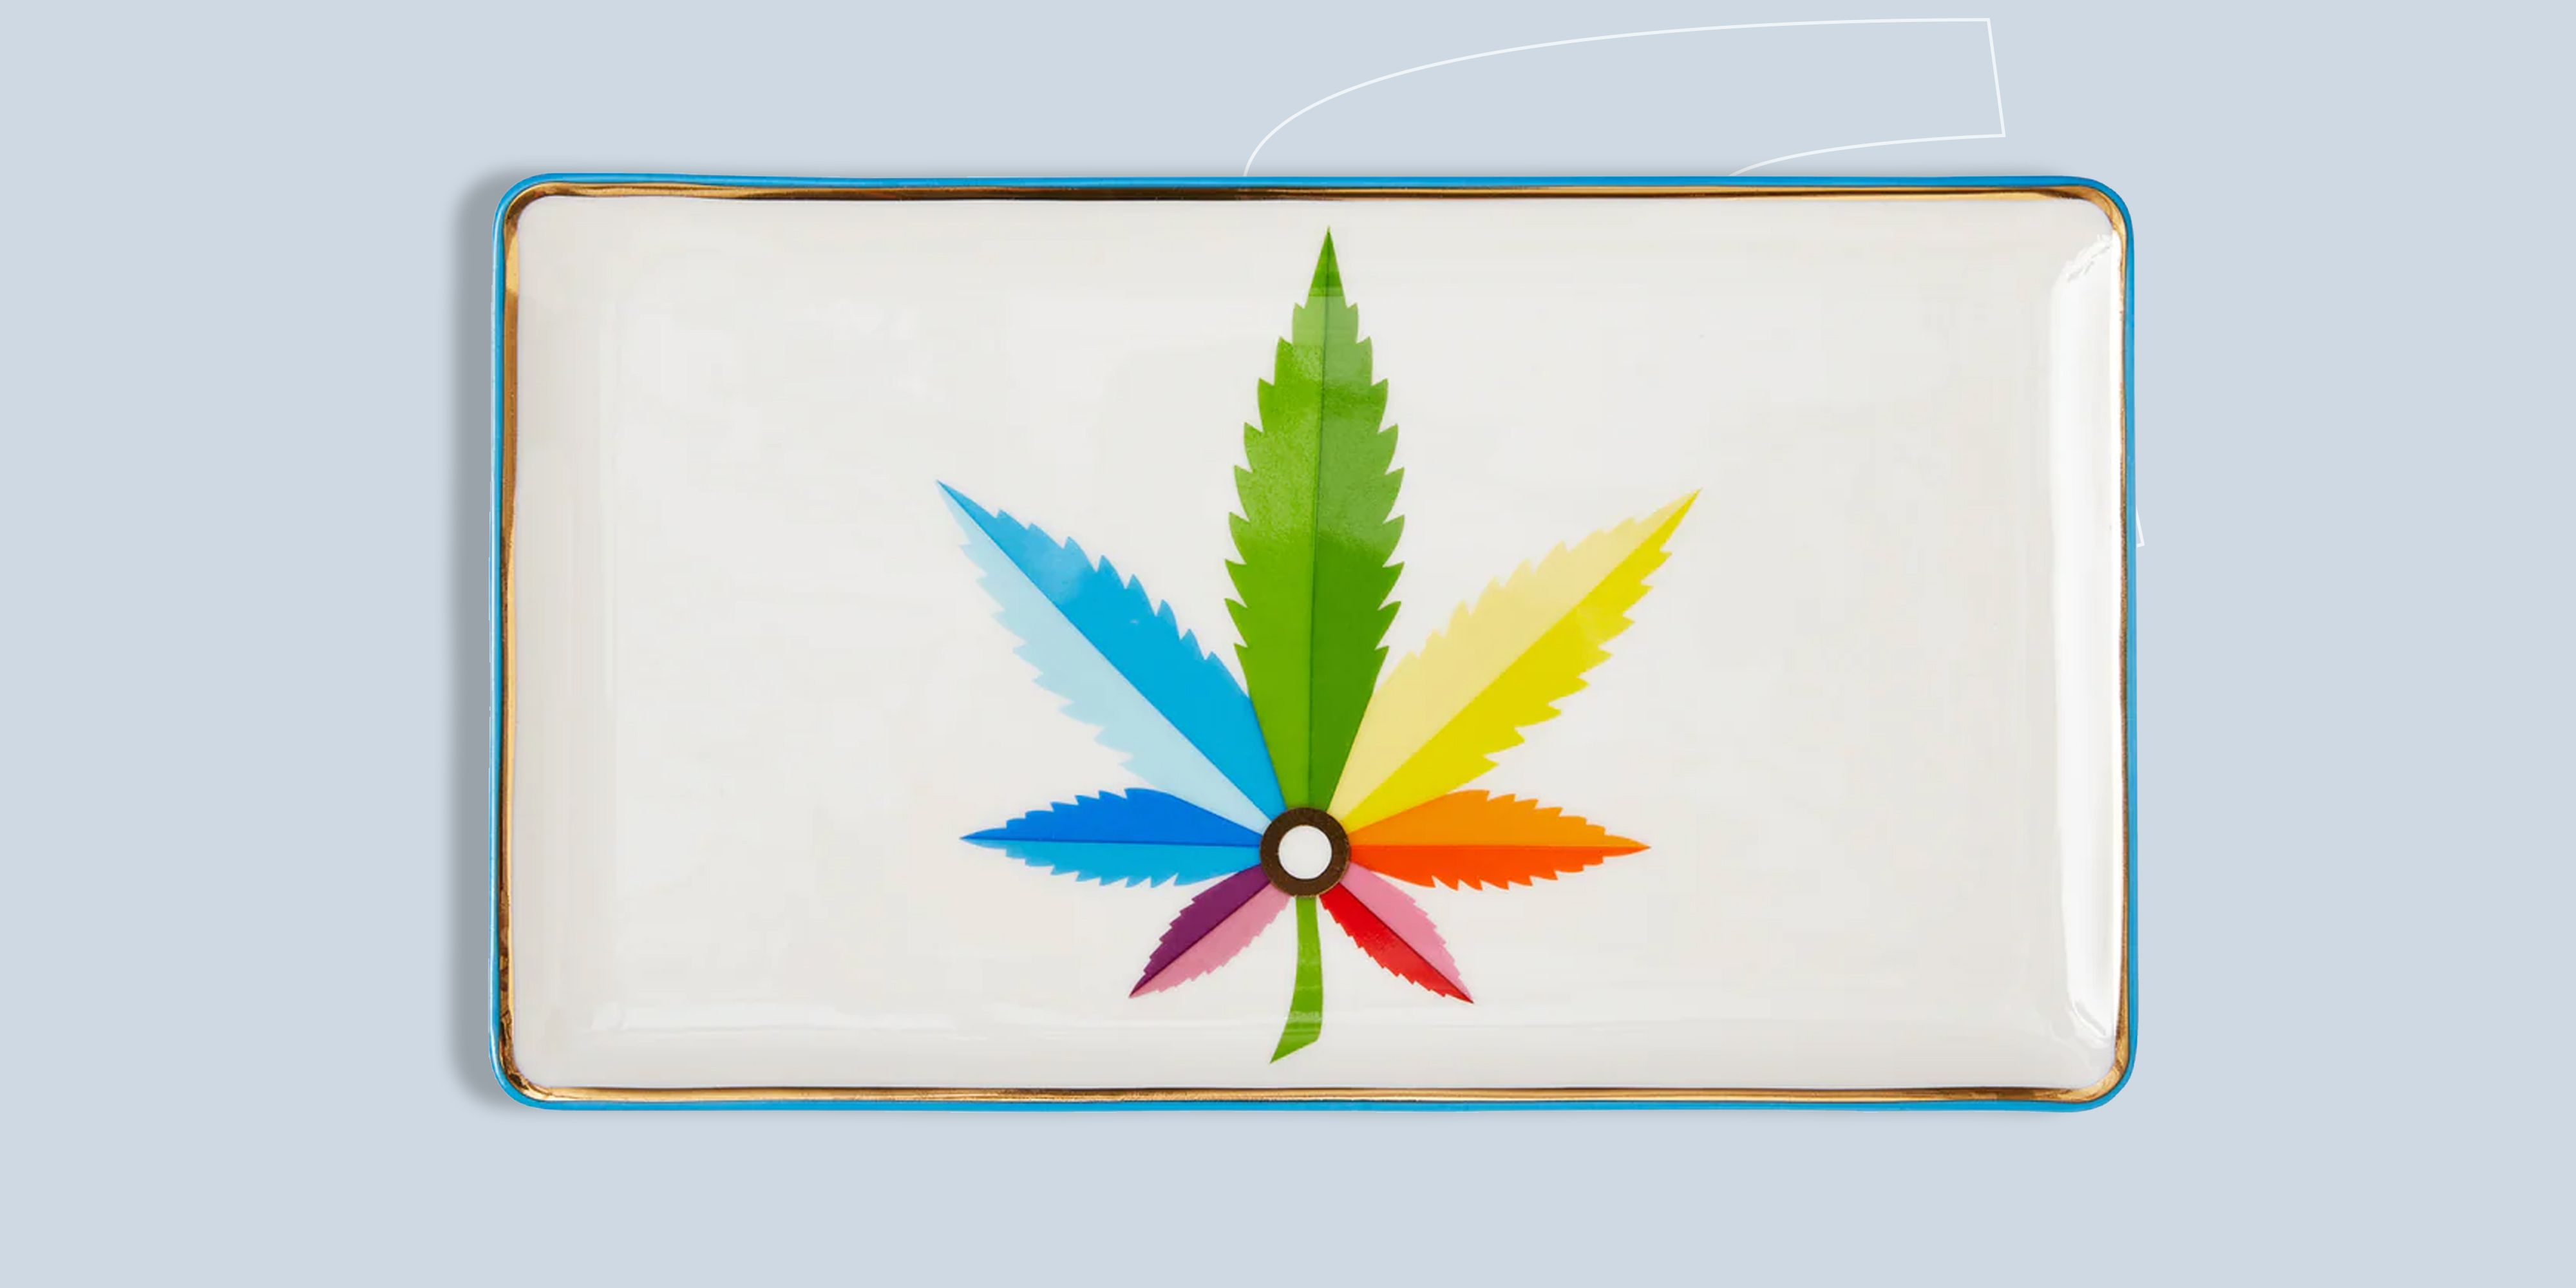 Rolling Trays: Quality, Secure & Innovative Options